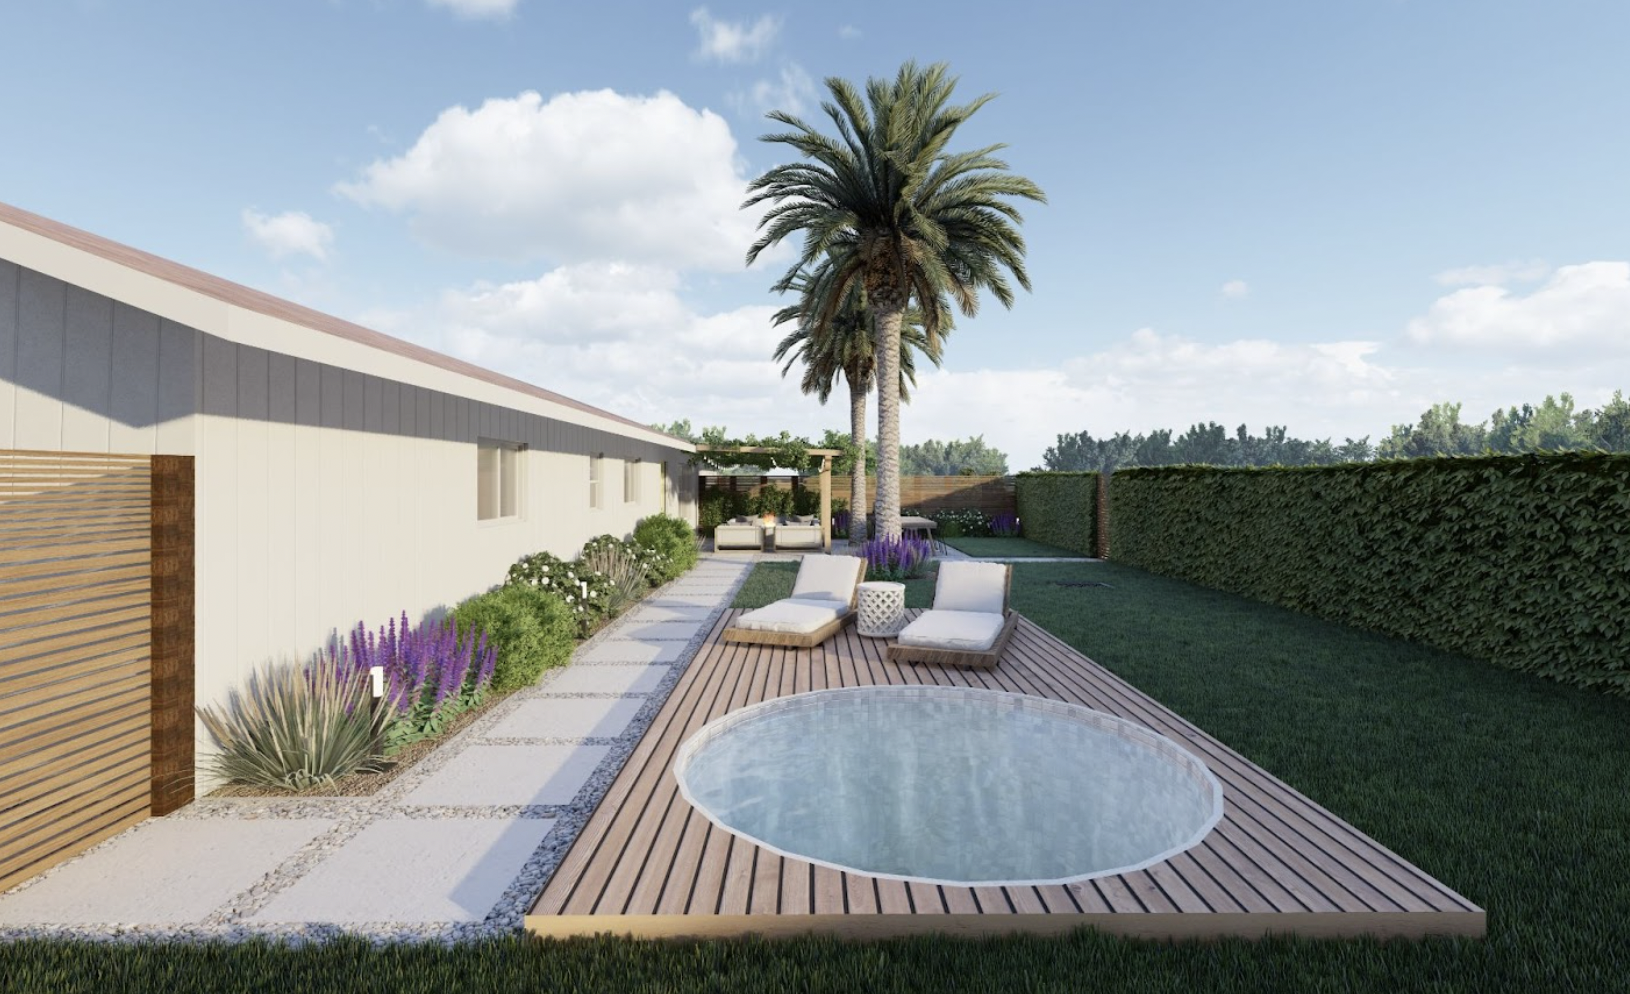 Backyard design with an in-deck stock tank pool with adjacent lounge chairs and palm trees in the background.